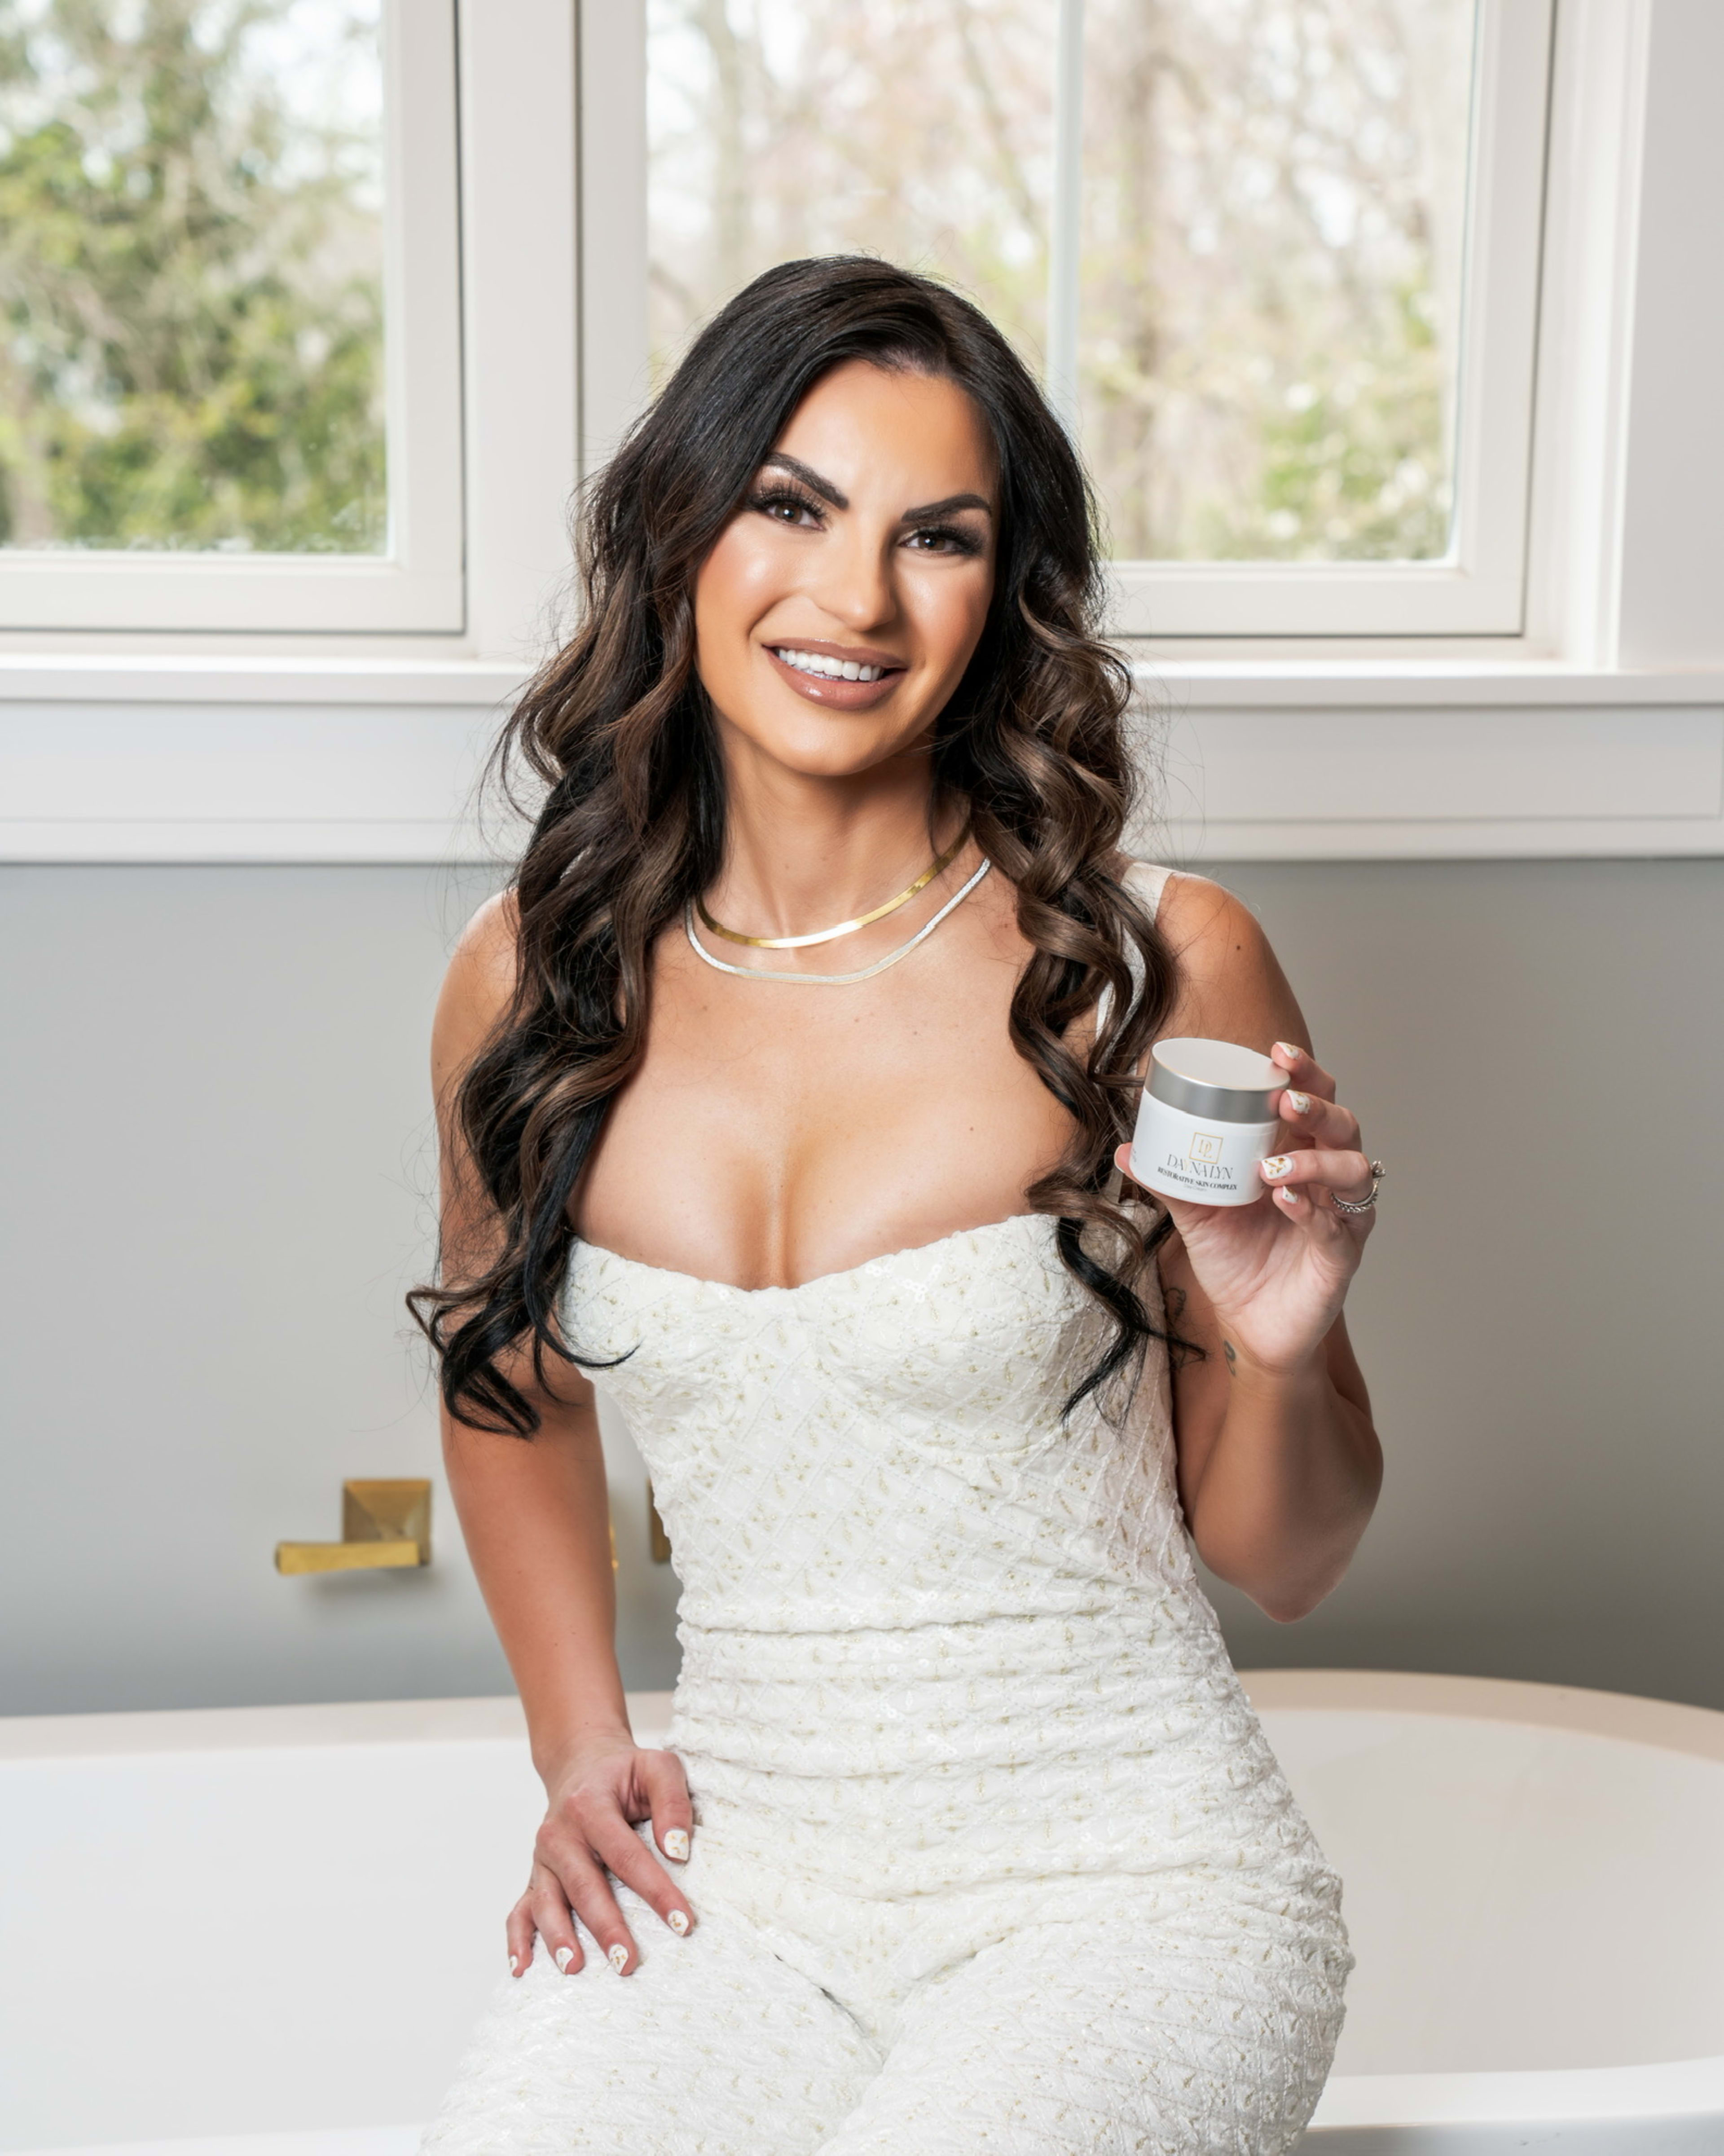 A photo shoot of a woman in white holding a jar of cream.